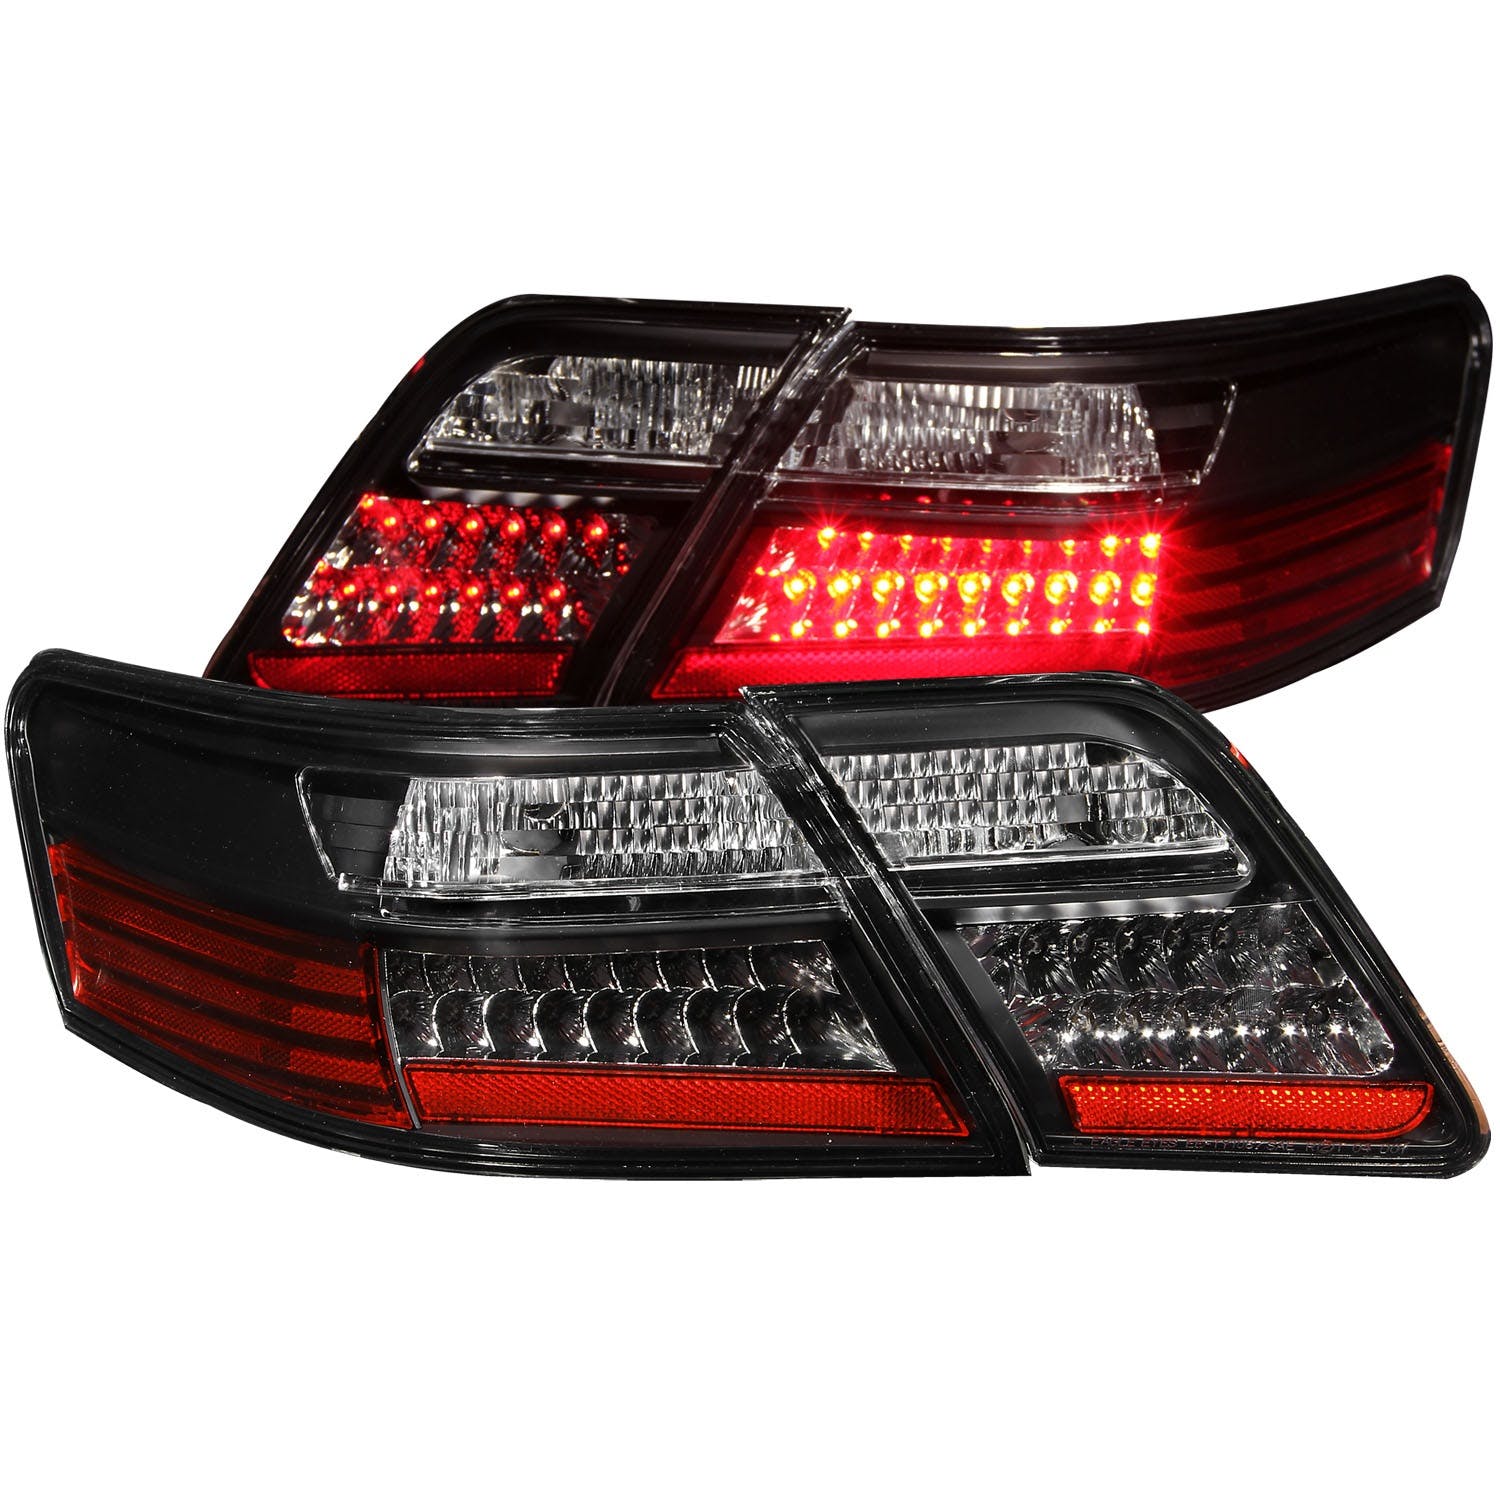 AnzoUSA 321163 LED Taillights Black